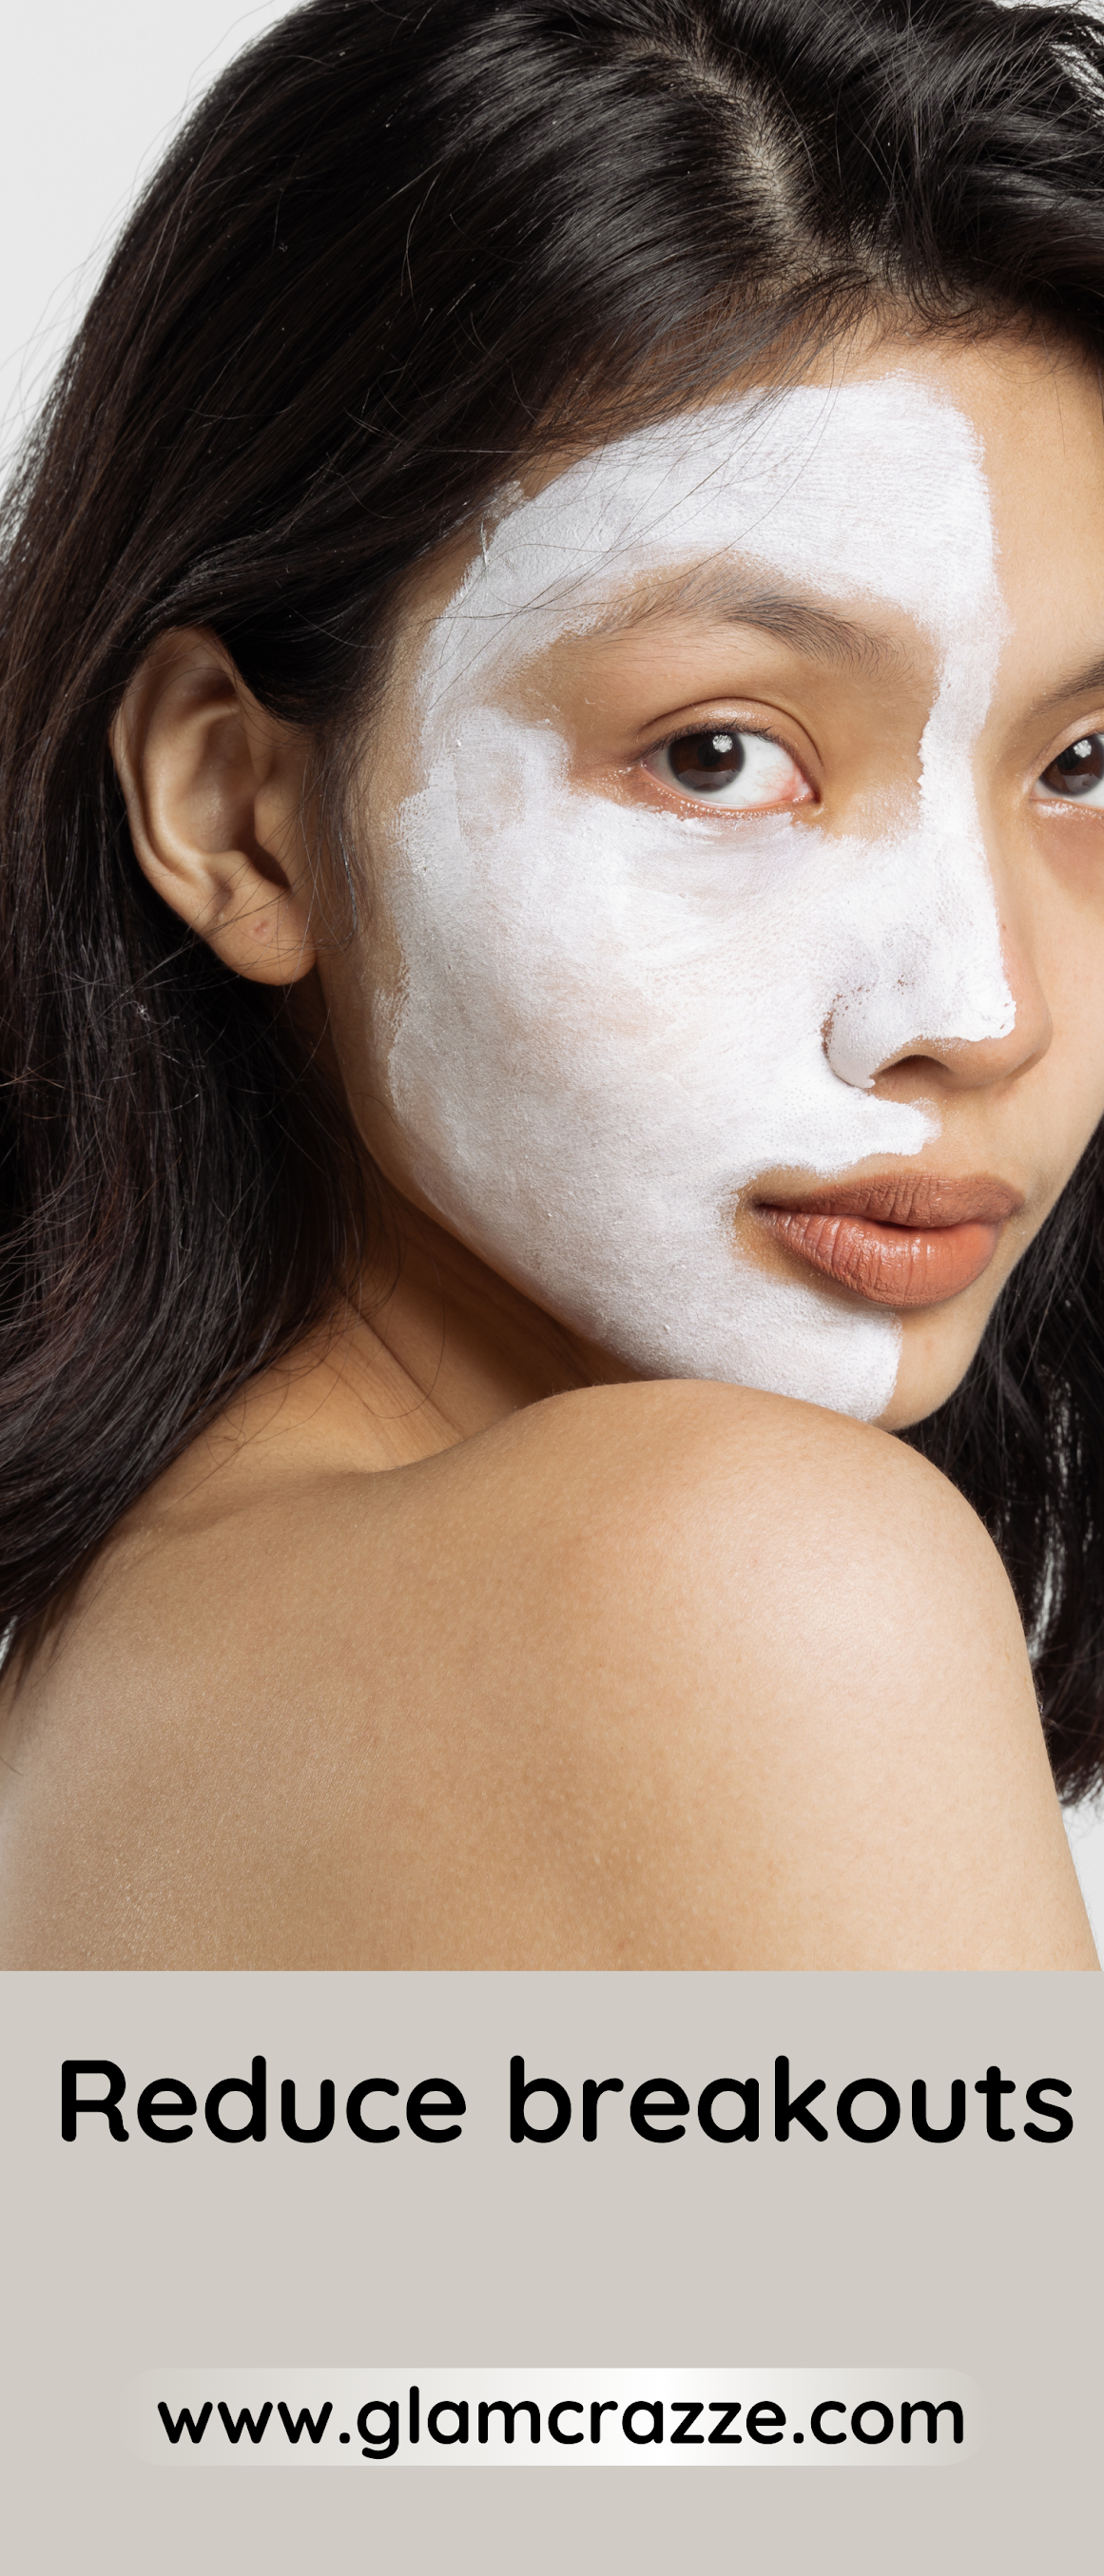 phenoxyethanol in skin care reduces breakouts